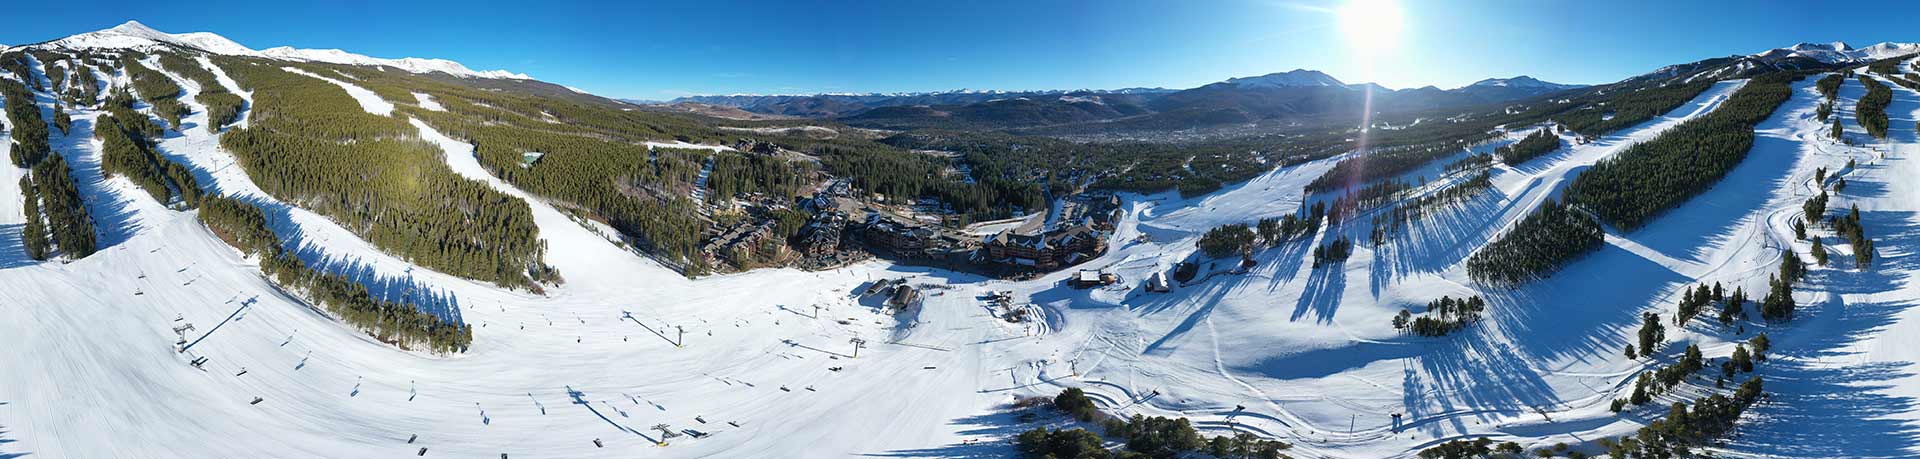 Panoramic shot of Breckenridge Co on Opening Day